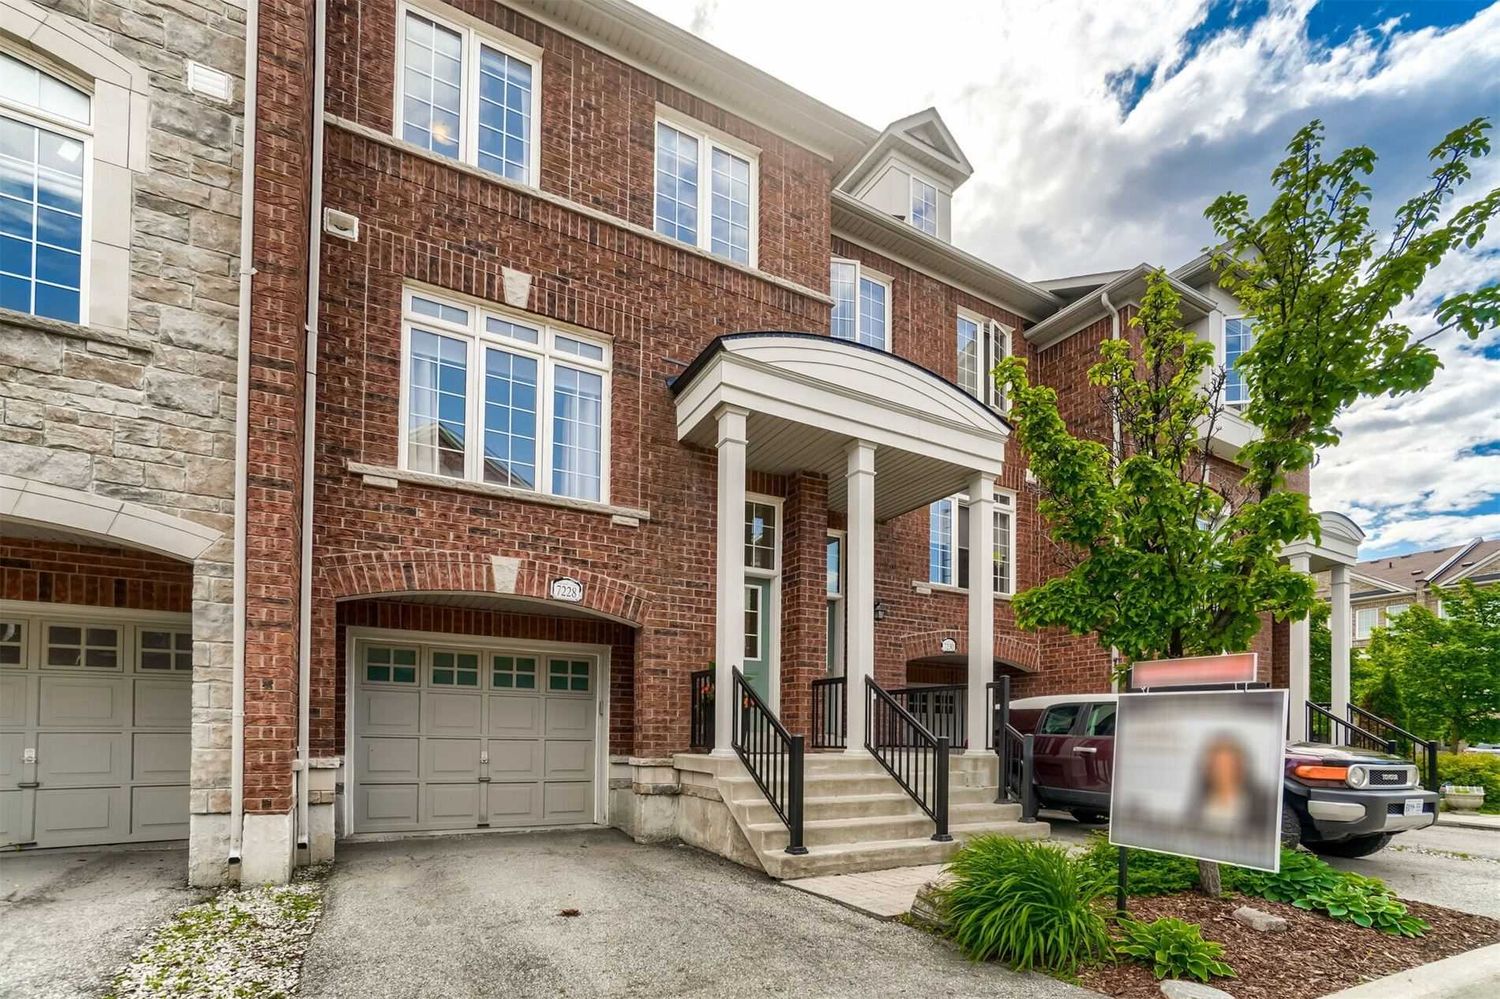 7172 Triumph Lane. 7172 Triumph Lane Townhomes is located in  Mississauga, Toronto - image #2 of 2